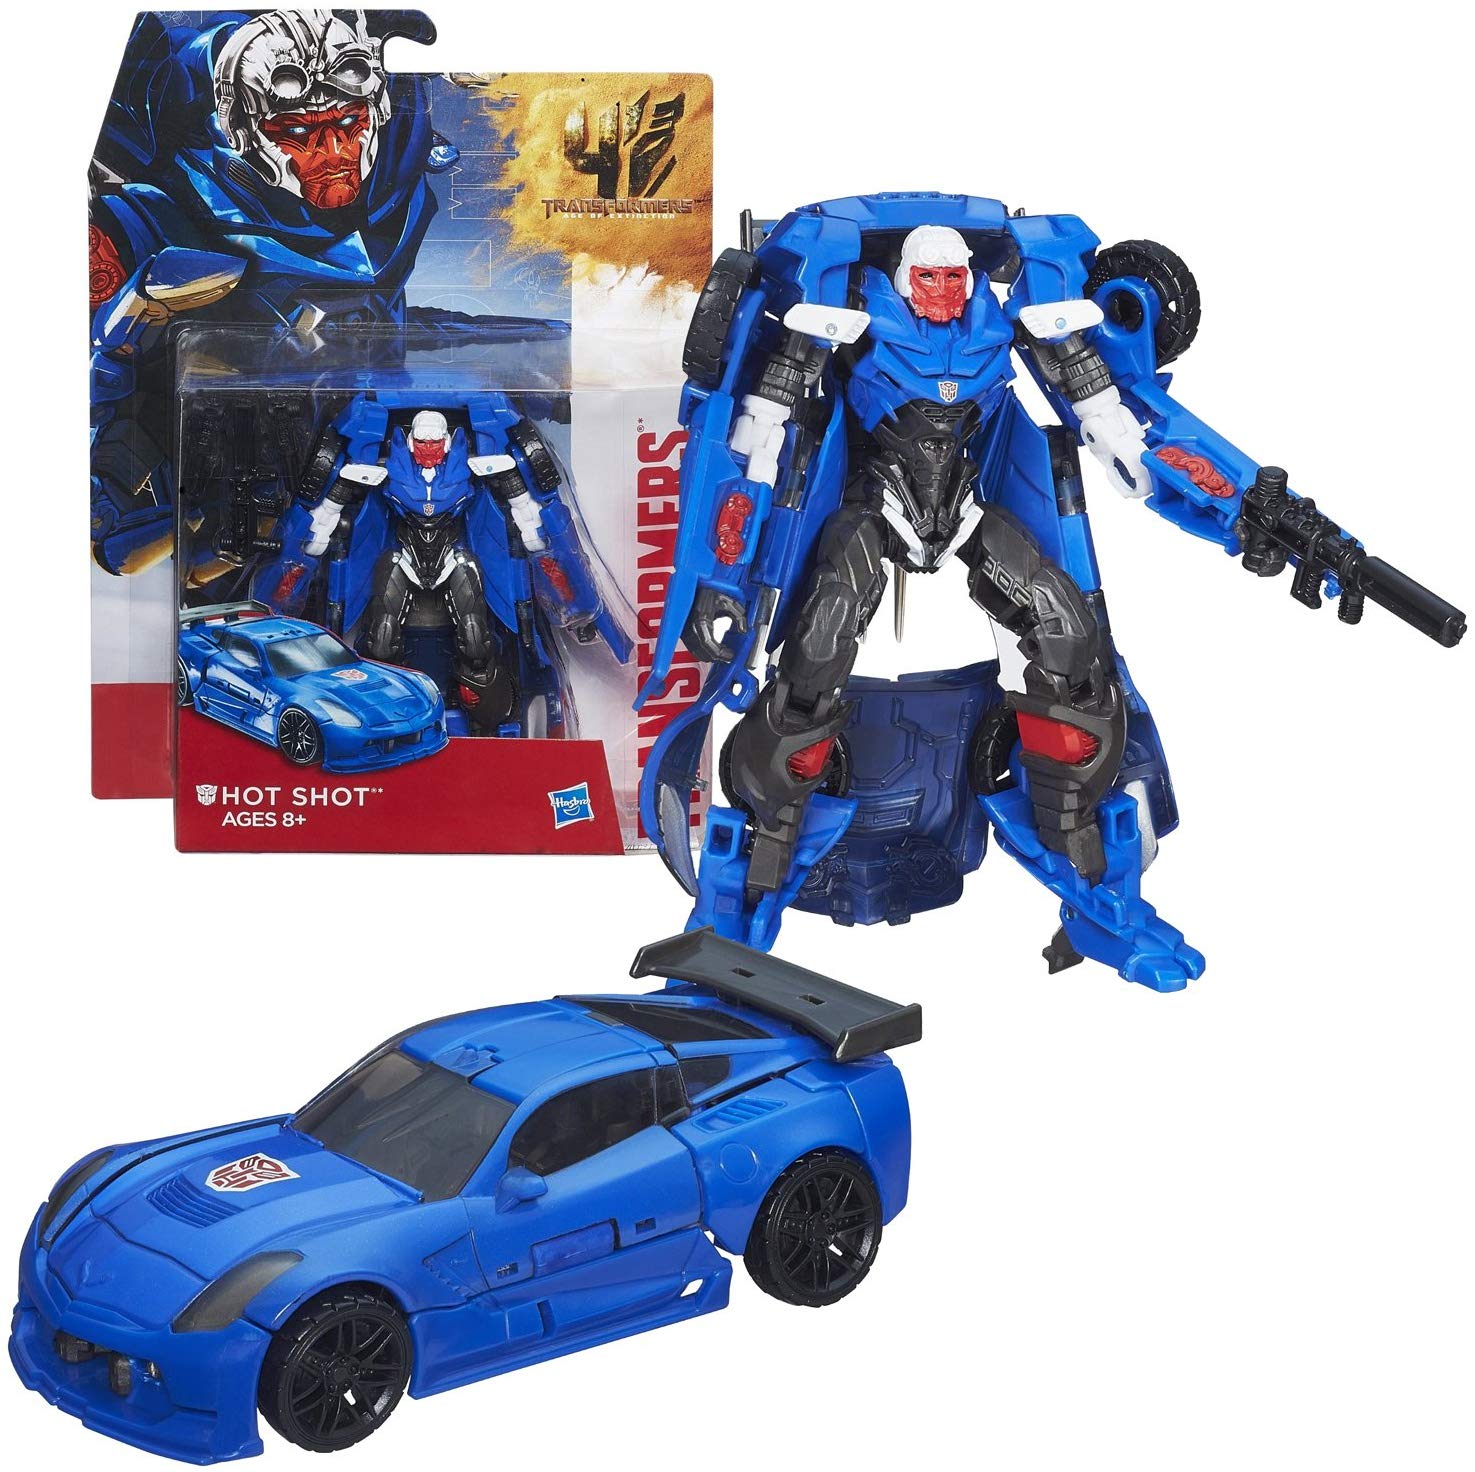 Transformers 4 Generations Age of Extinction Hot Shot Action Figure 1